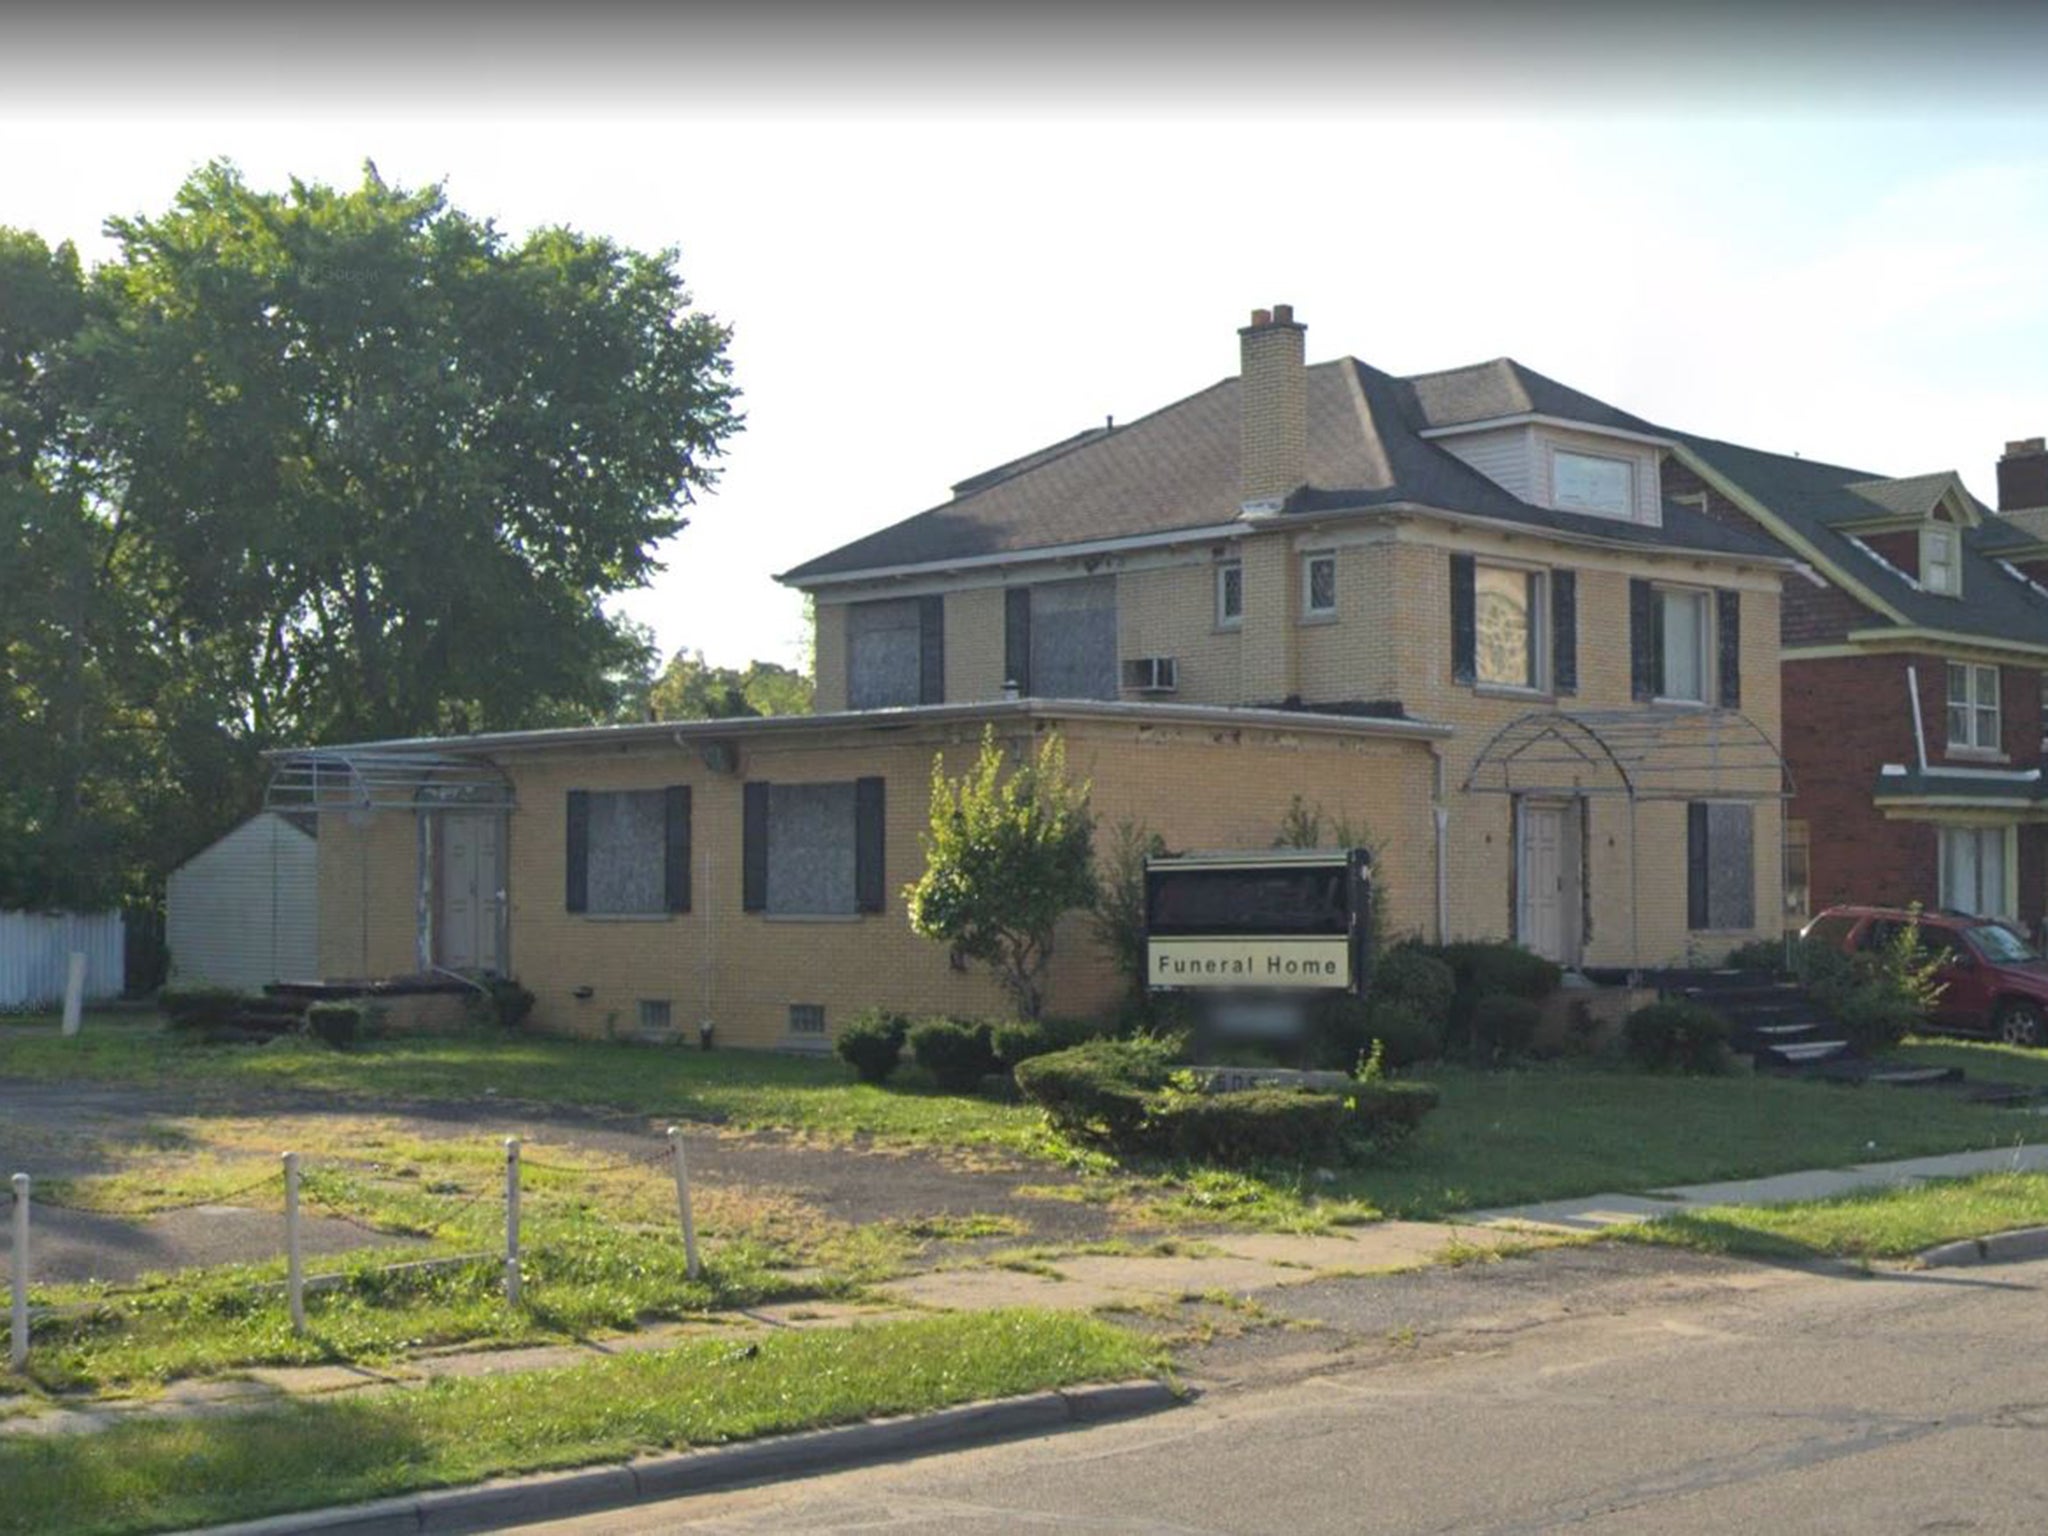 Mystery over cremated remains discovered in abandoned funeral home